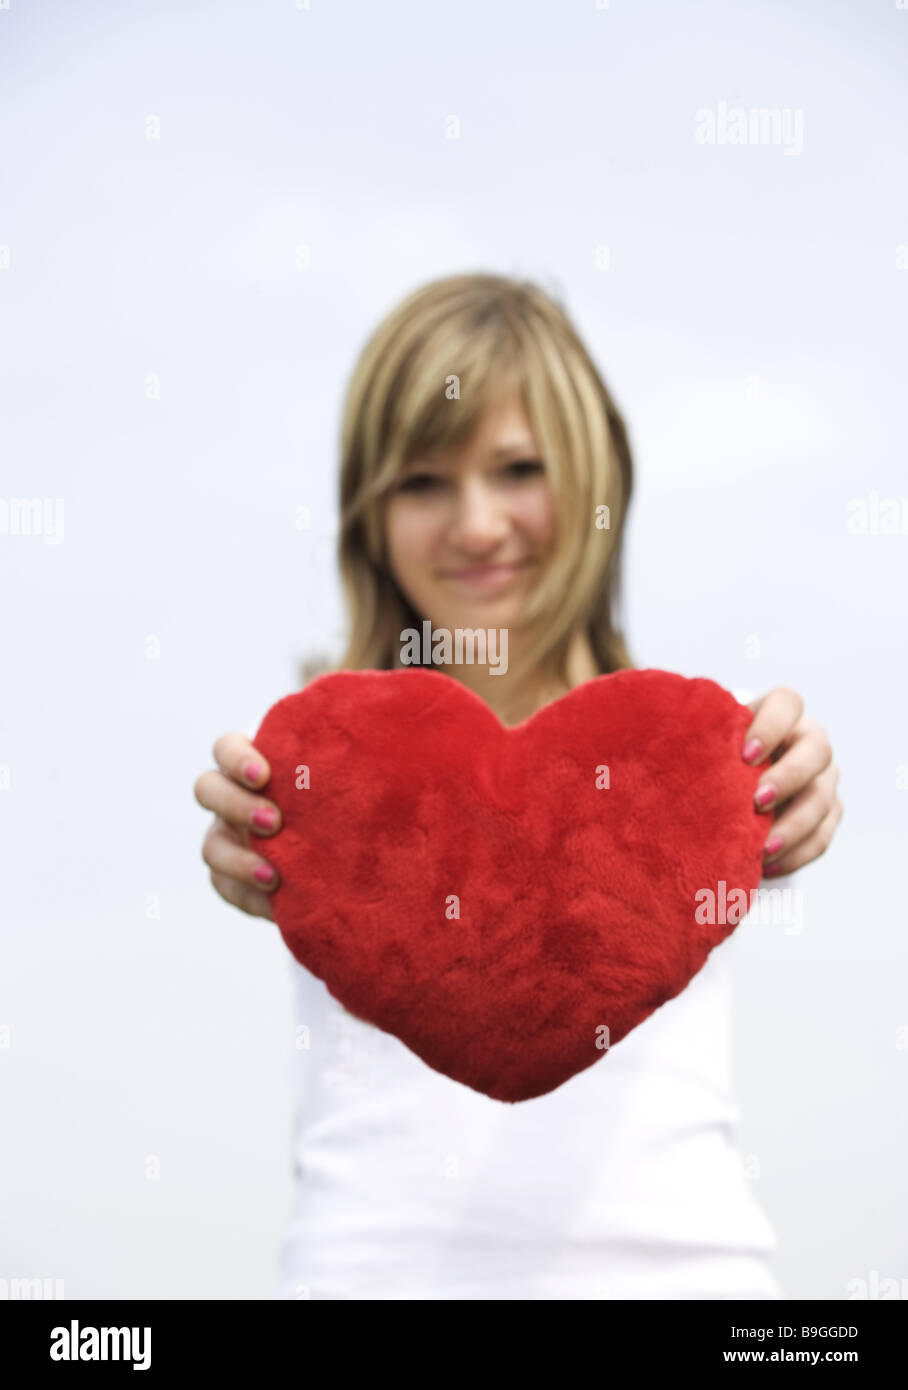 Woman young happily plush-heart holding portrait fuzziness people teenagers girl youth 14 years heart love-symbol love symbol Stock Photo